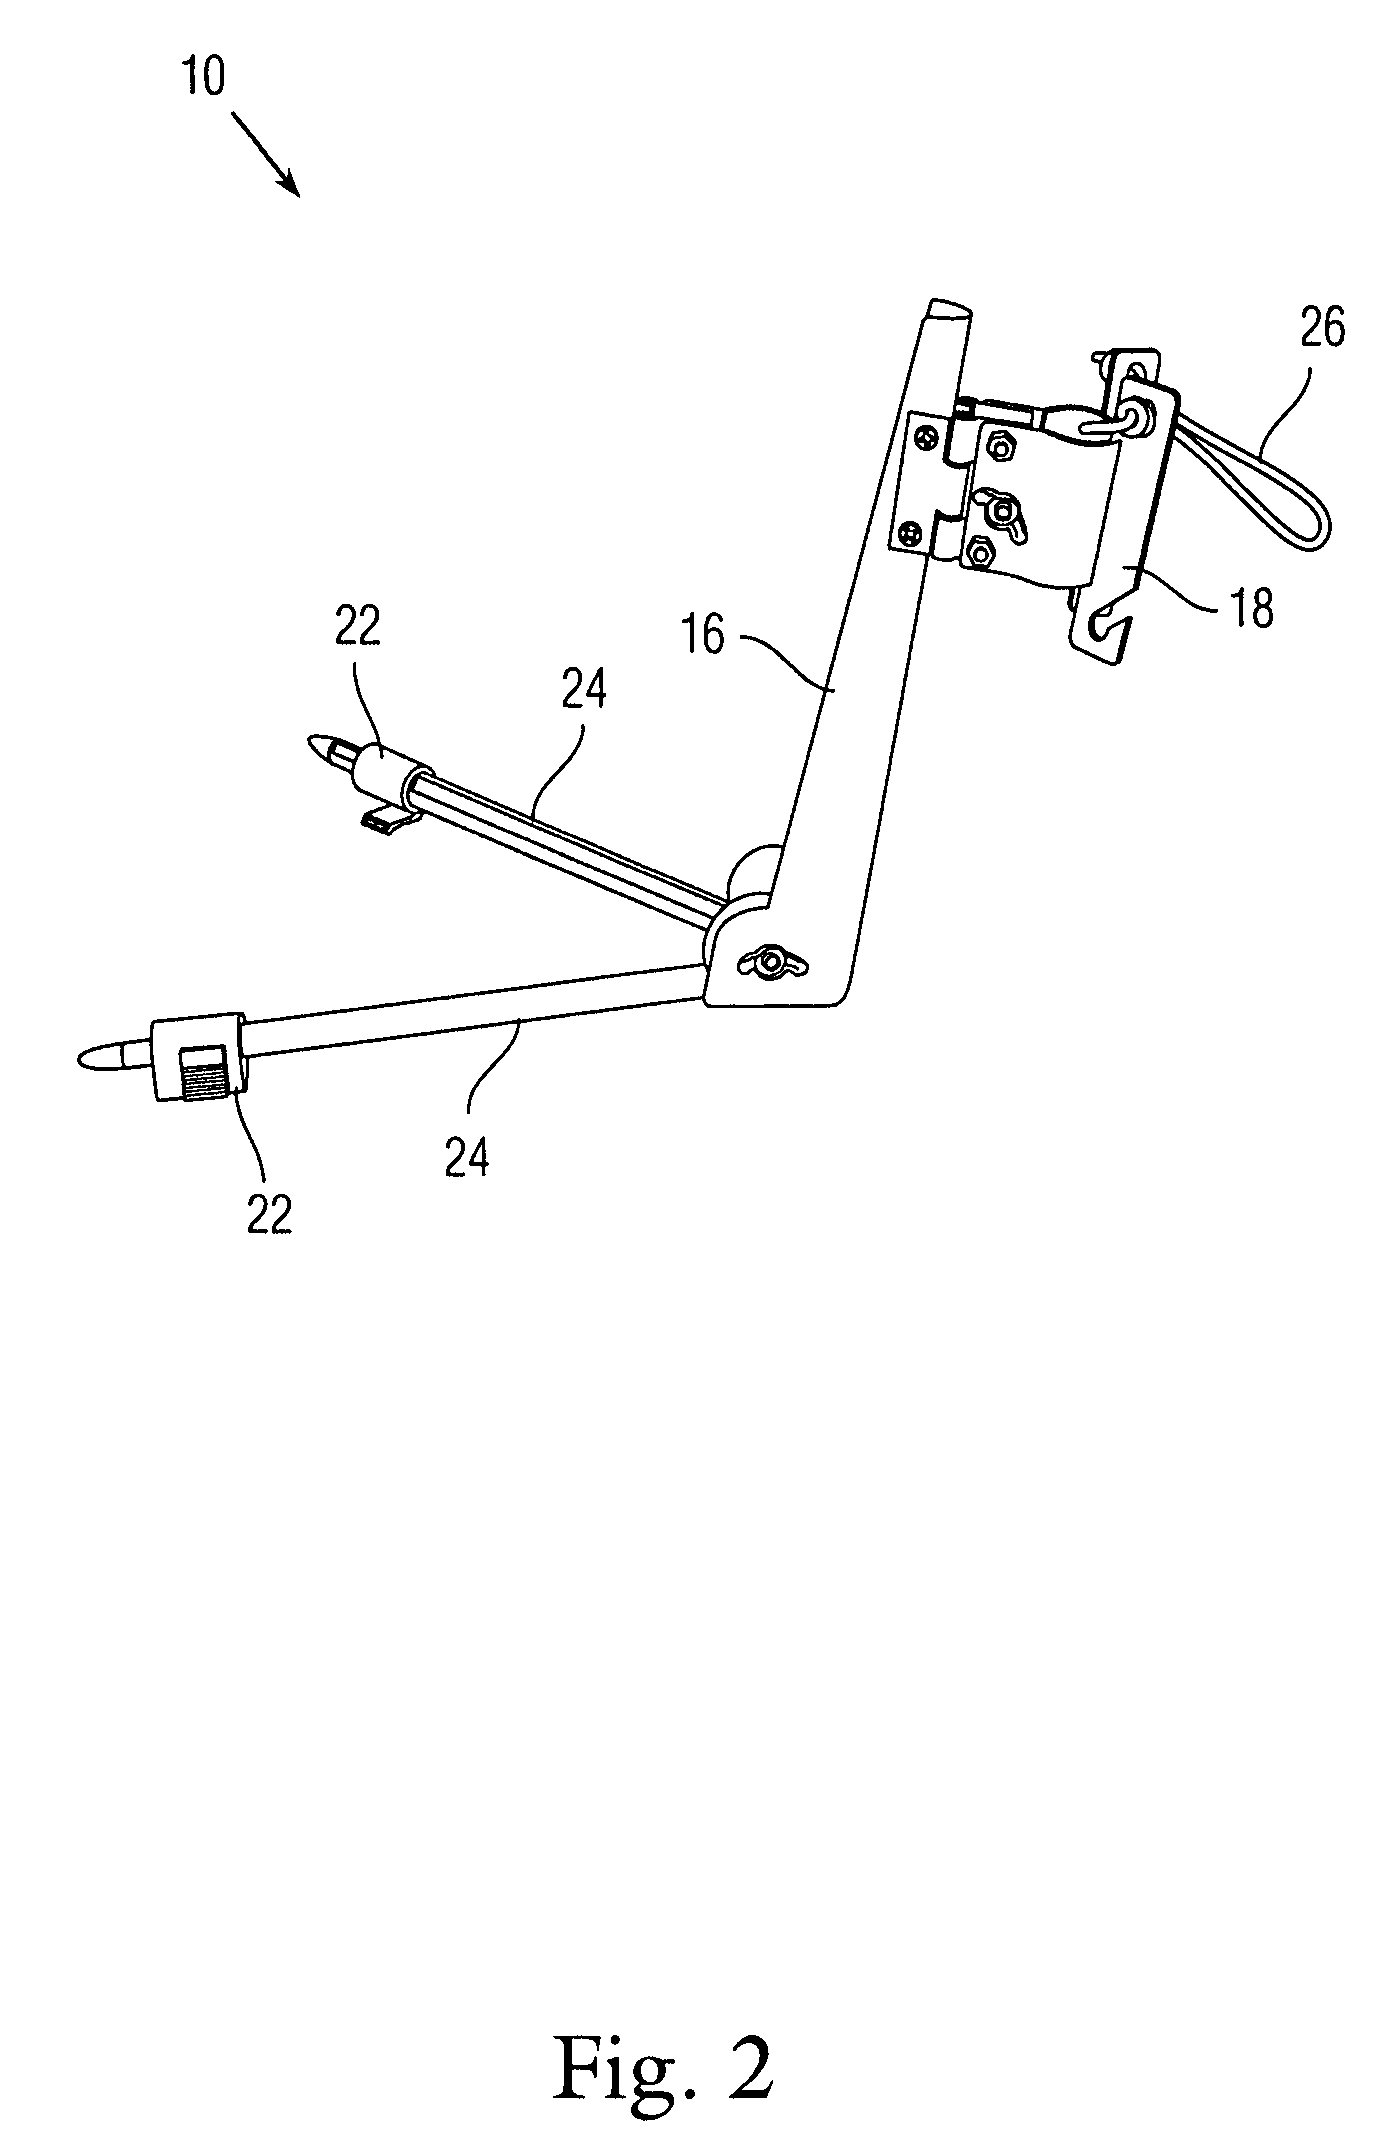 Device for safely raising and lowering a rifle between the ground and an elevated stand